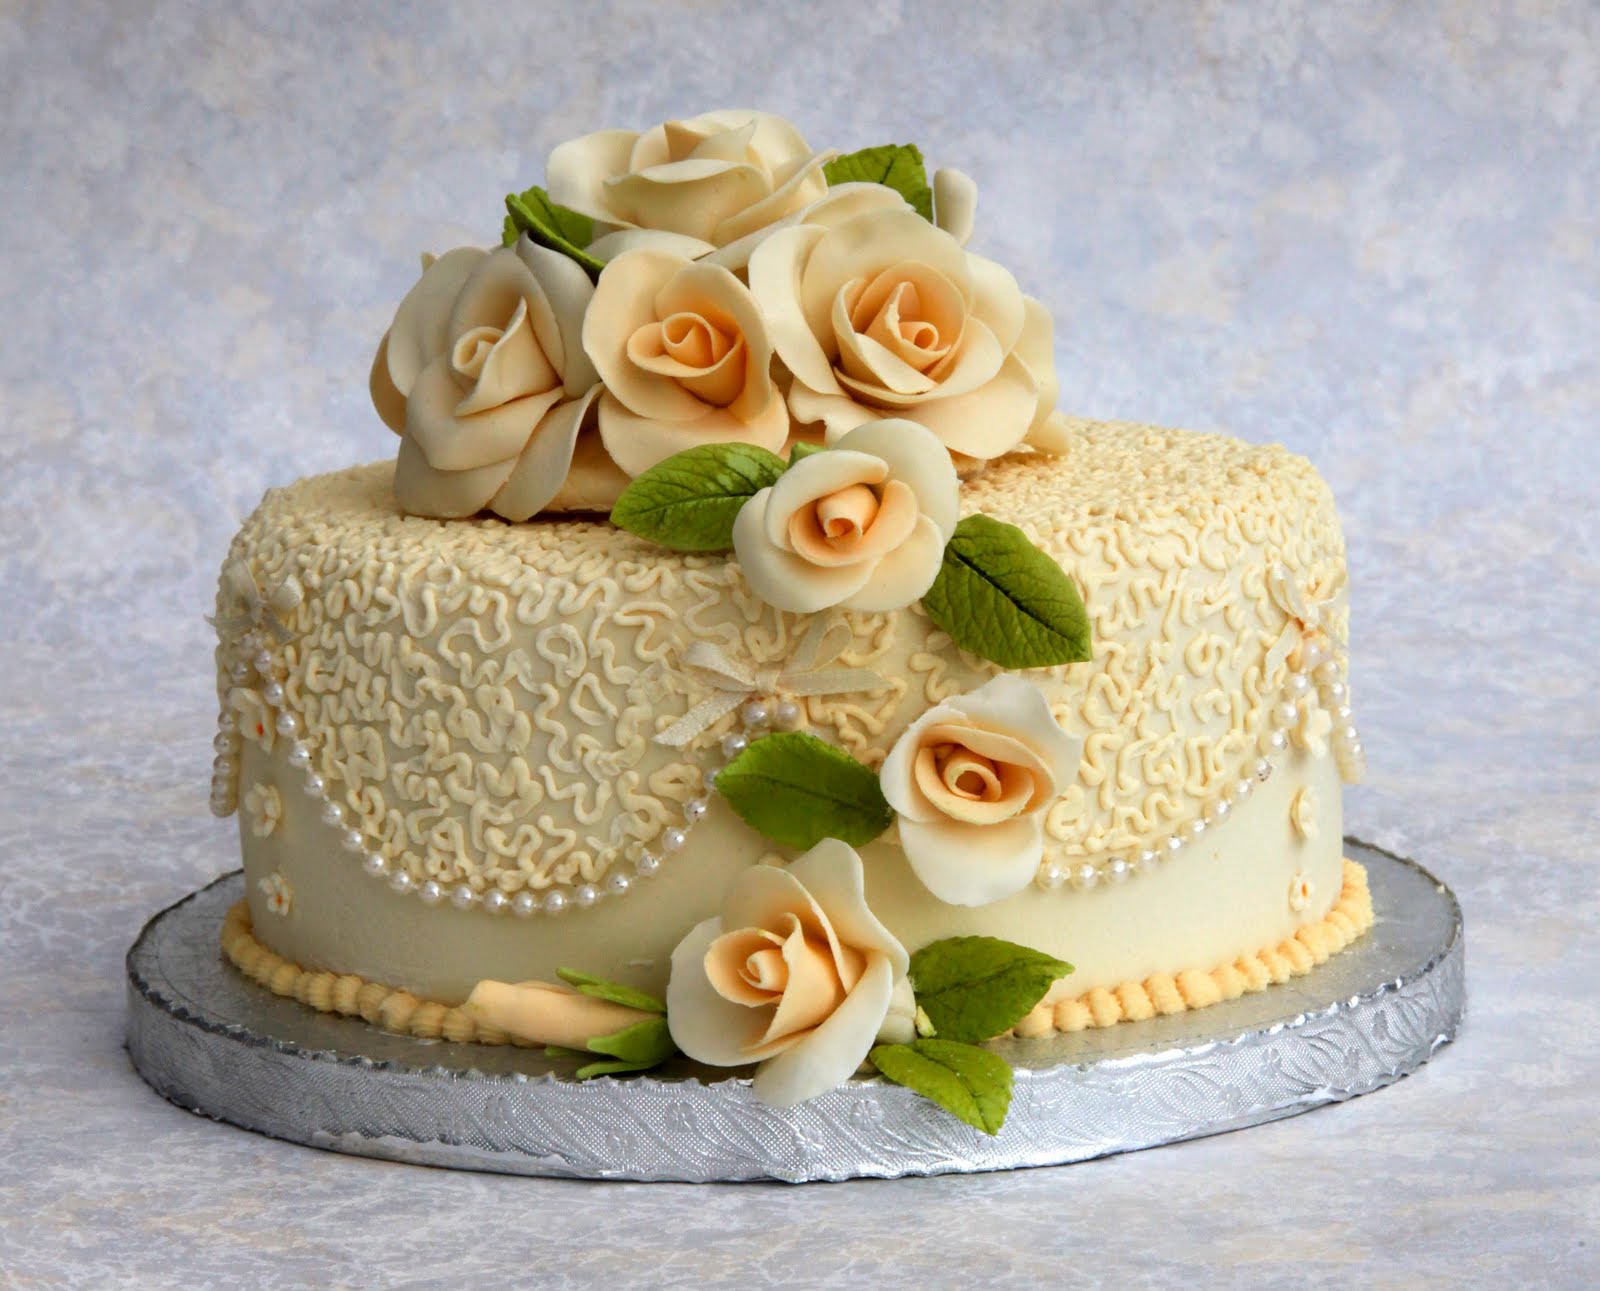 25 Most Beautiful Cake Selections - Page 4 of 25